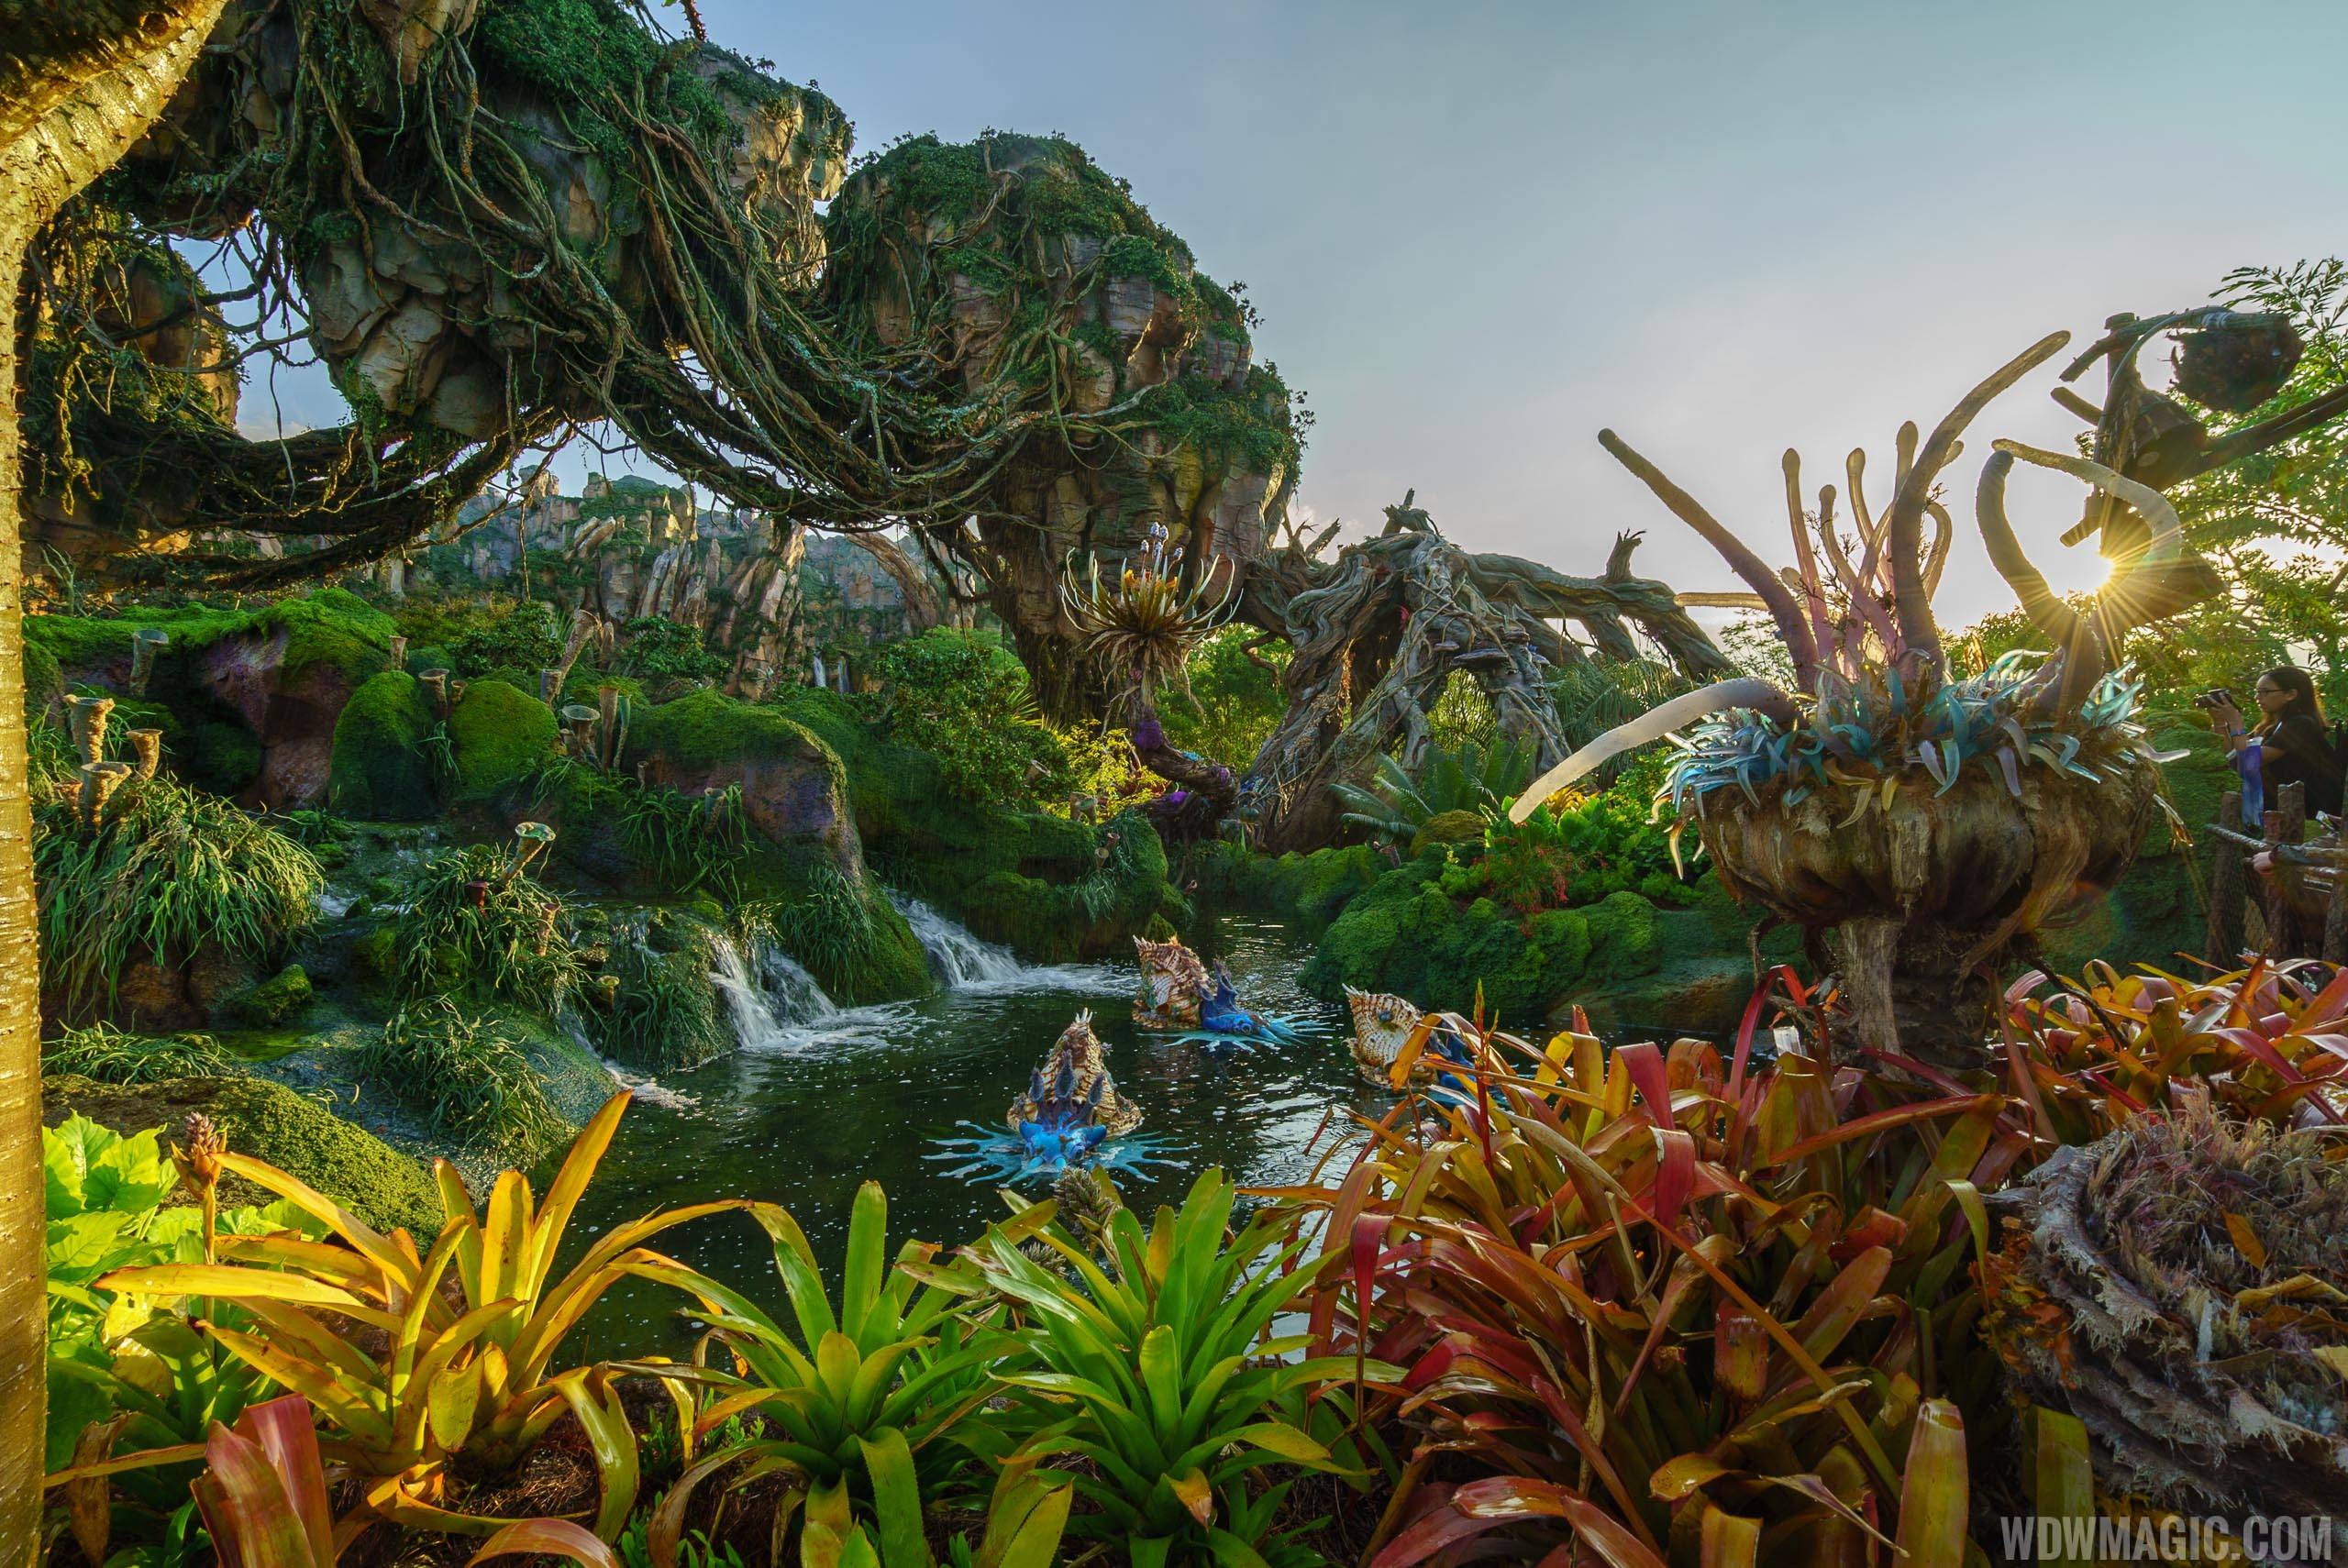 Pandora - The World of Avatar can be experienced as part of Disney After Hours